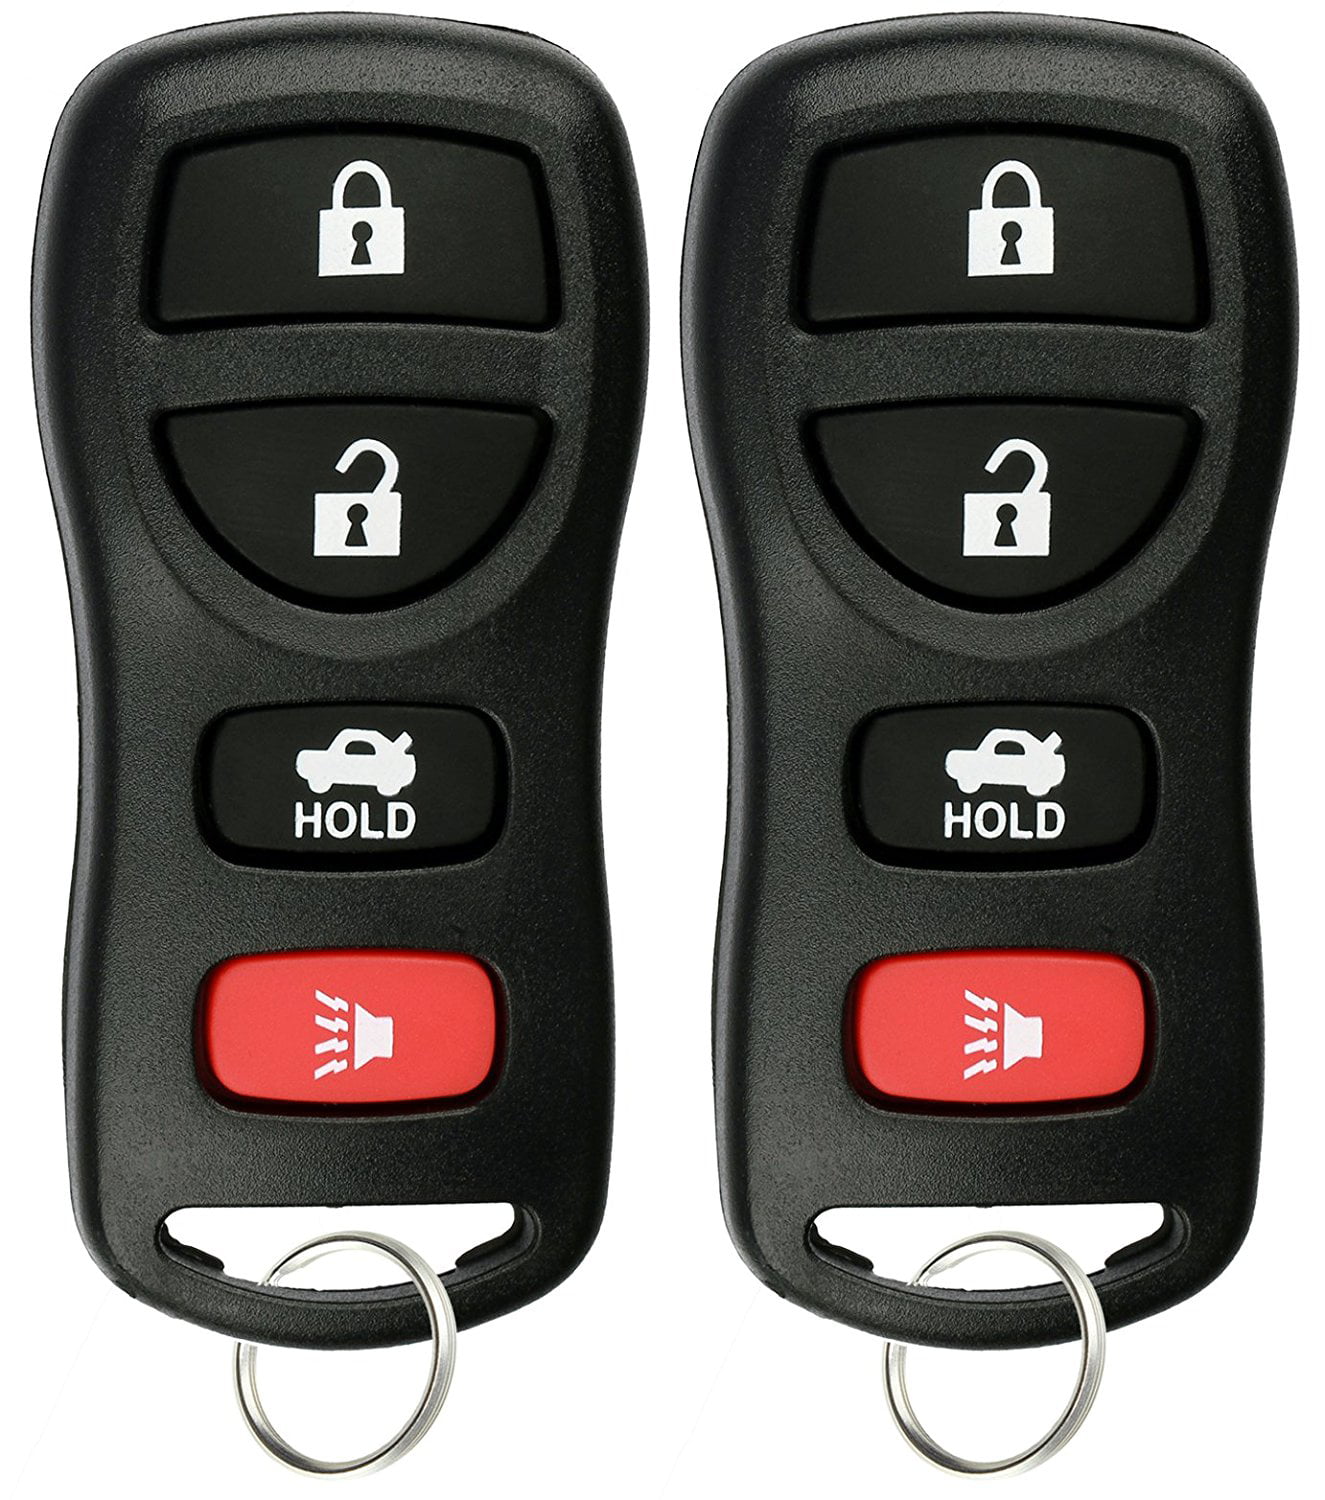 Pack of 2 KR55WK49622 KeylessOption Keyless Entry Remote Control Car Smart Key Fob Replacement for KR55WK48903 